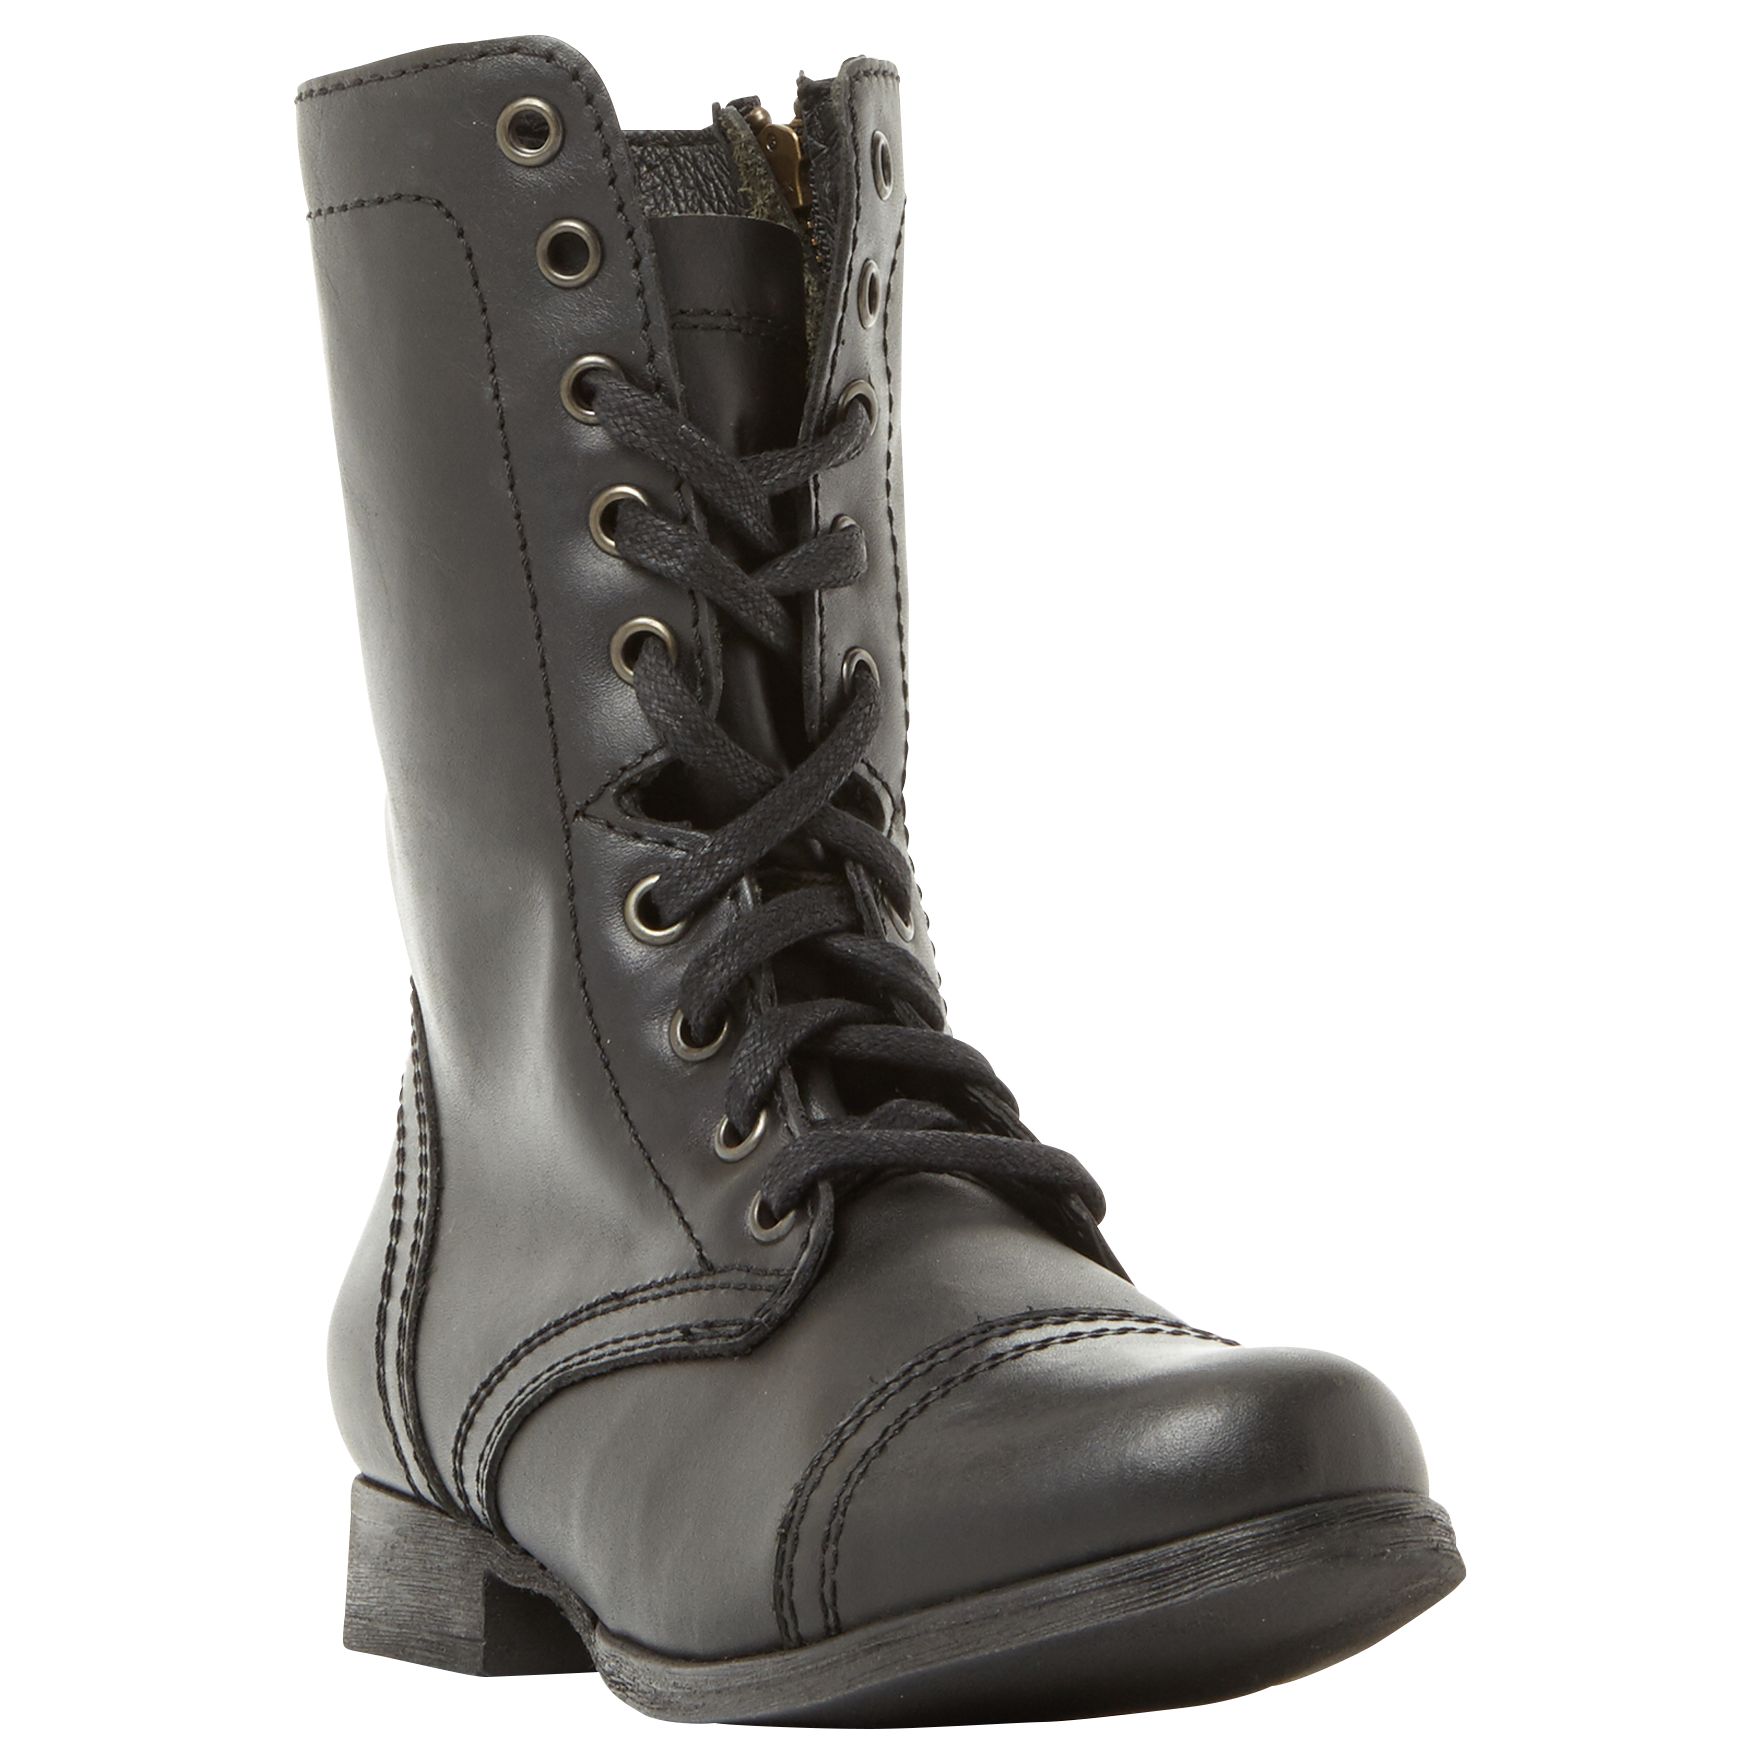 Steve Madden Troopa Lace Up Boots, Black, 4